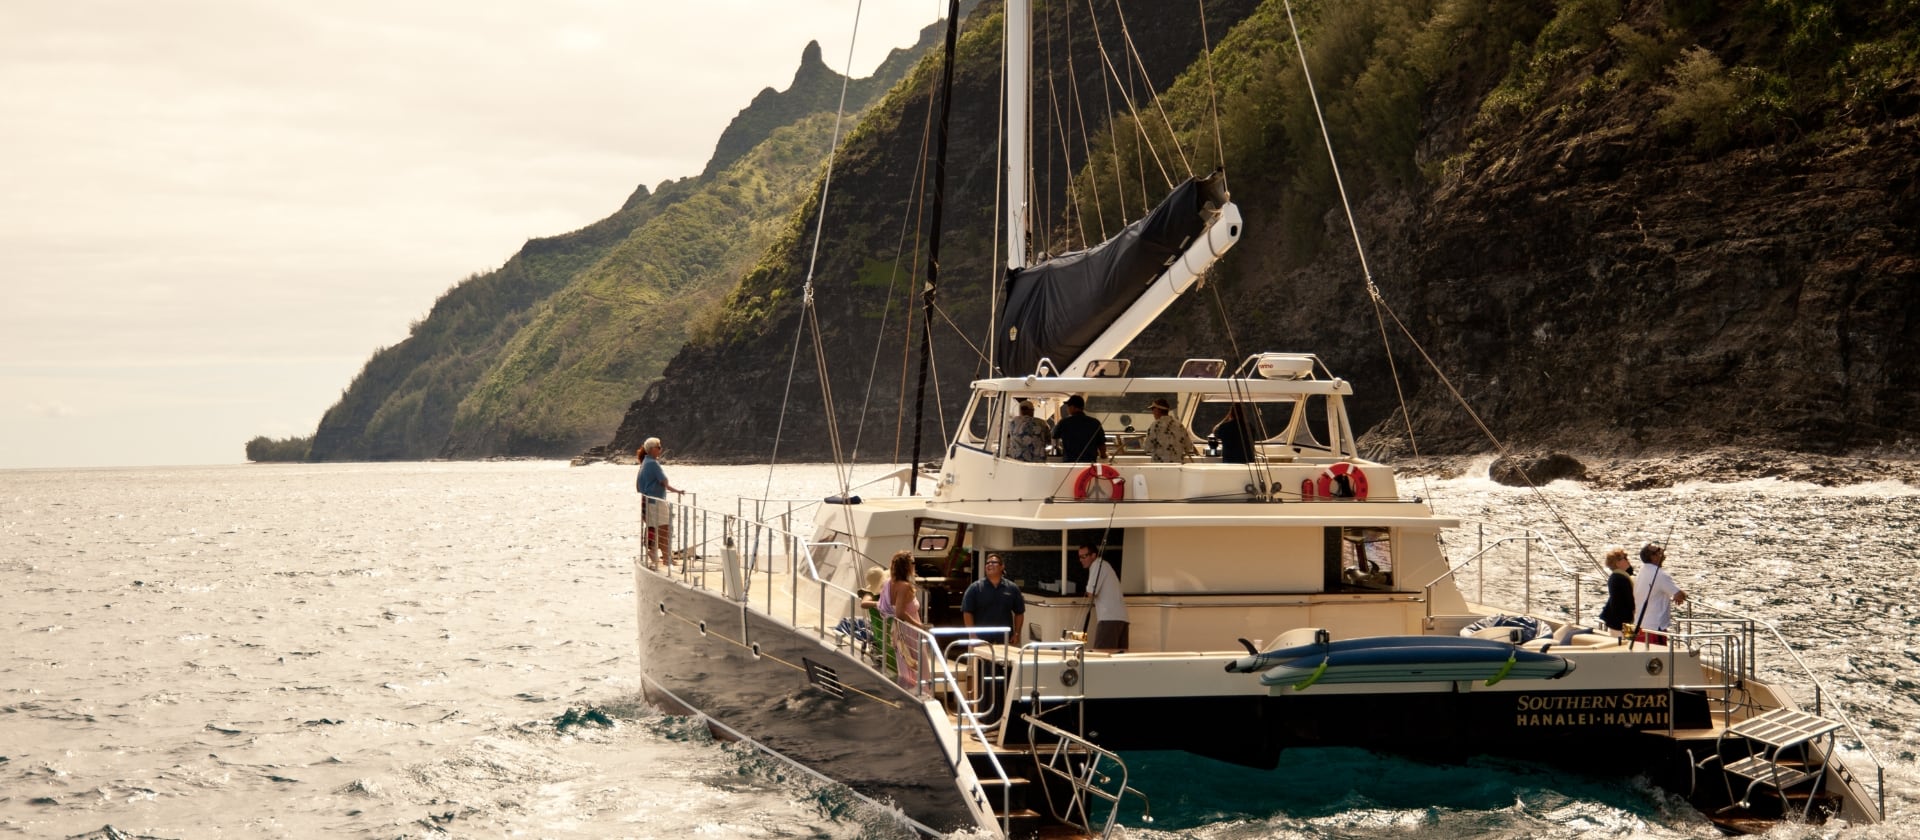 Captain Andy's catamaran, Southern Star, sailing along the Na Pali Coast with lush green cliffs in the background and passengers enjoying the view